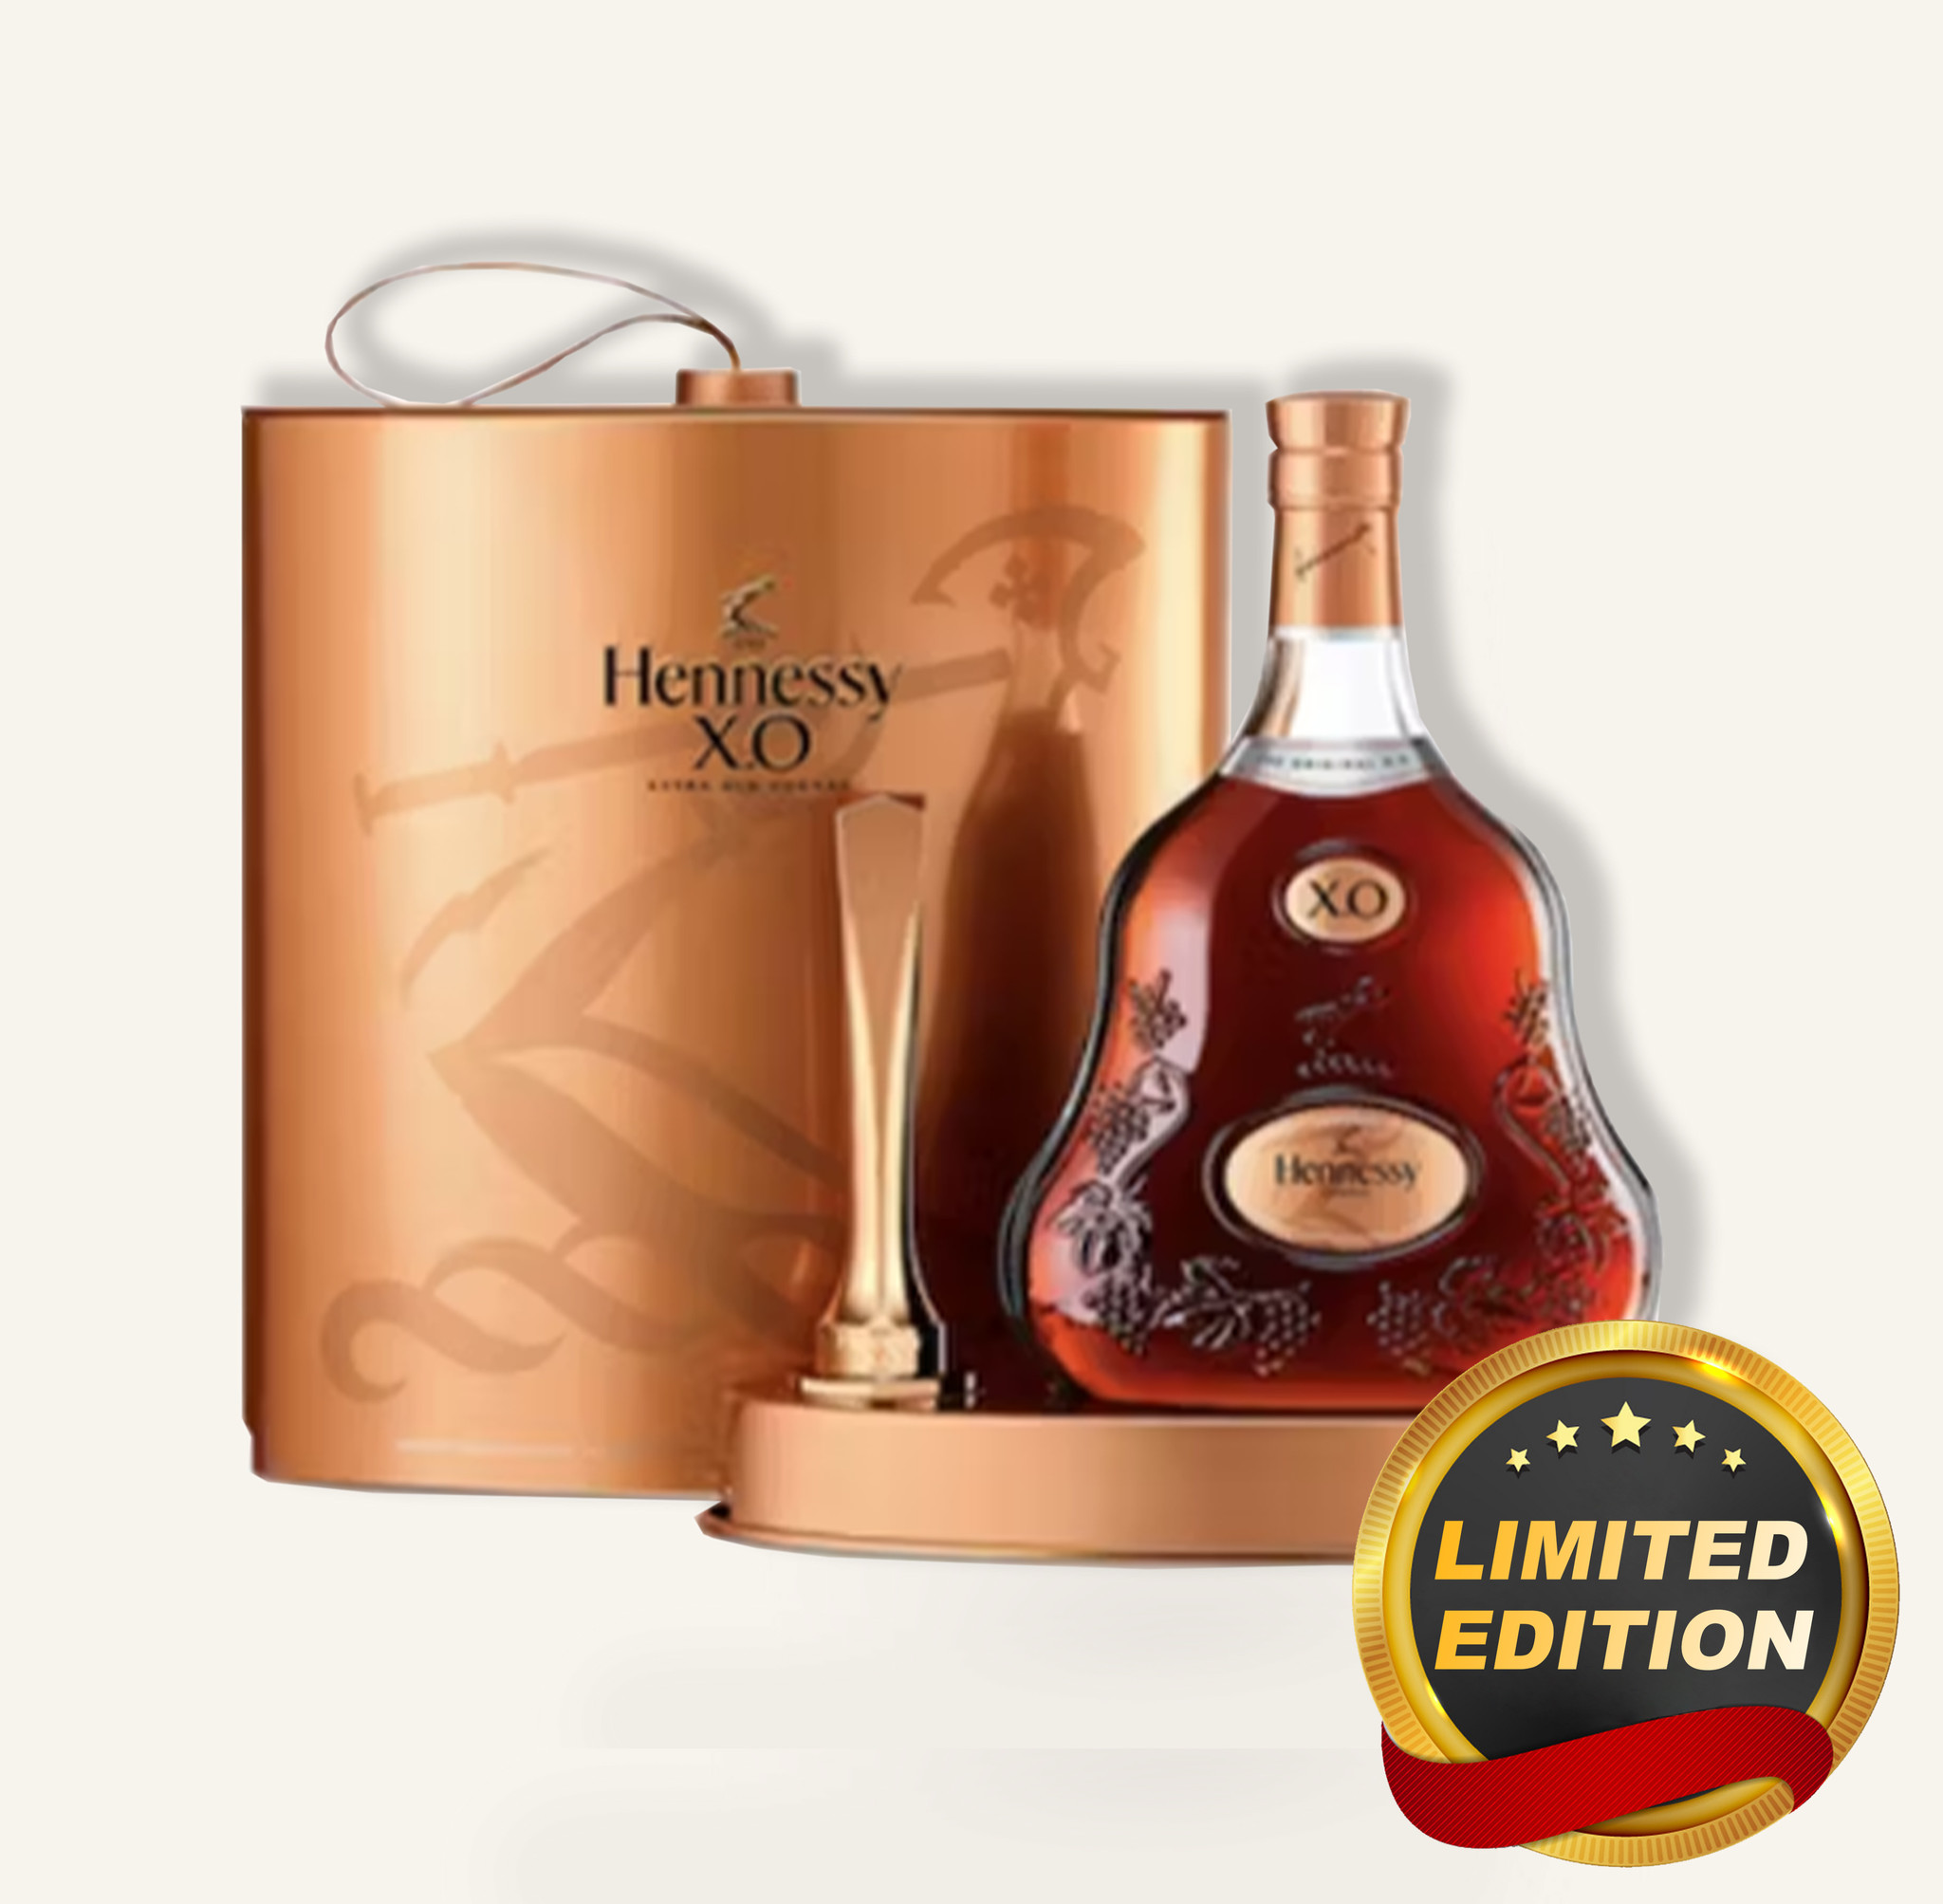 Buy Hennessy Limited Editions, Online Shop